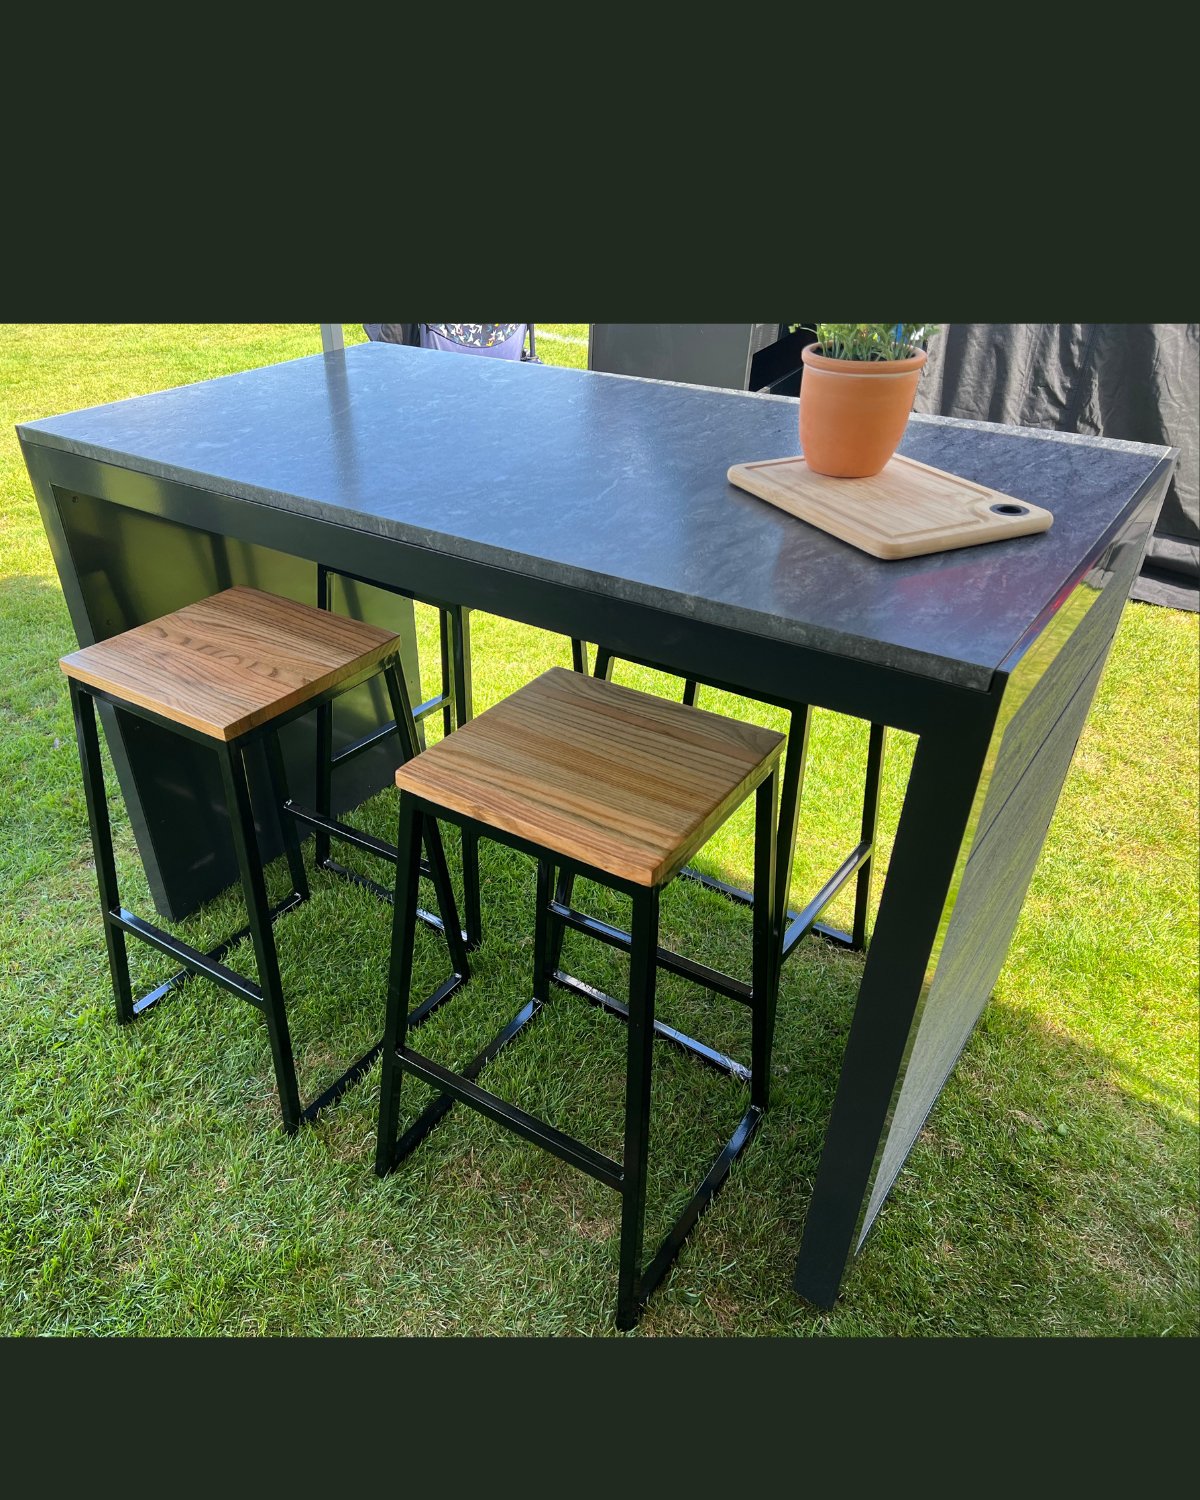 Seating/Bar Unit - The Outdoor Kitchen Company Ltd